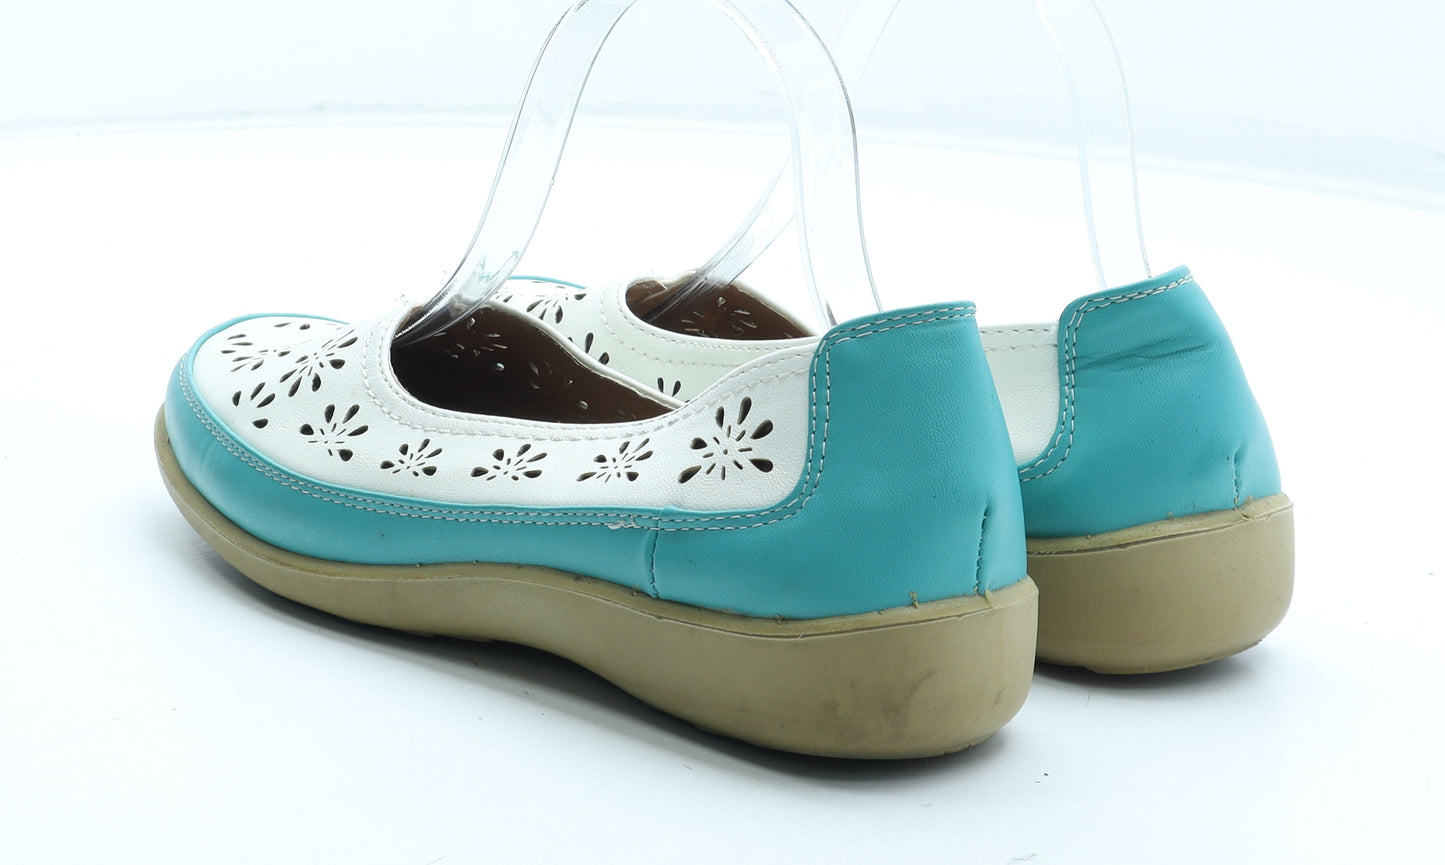 Cotton Traders Womens Blue Colourblock Leather Slip On Casual UK - Flower Pattern